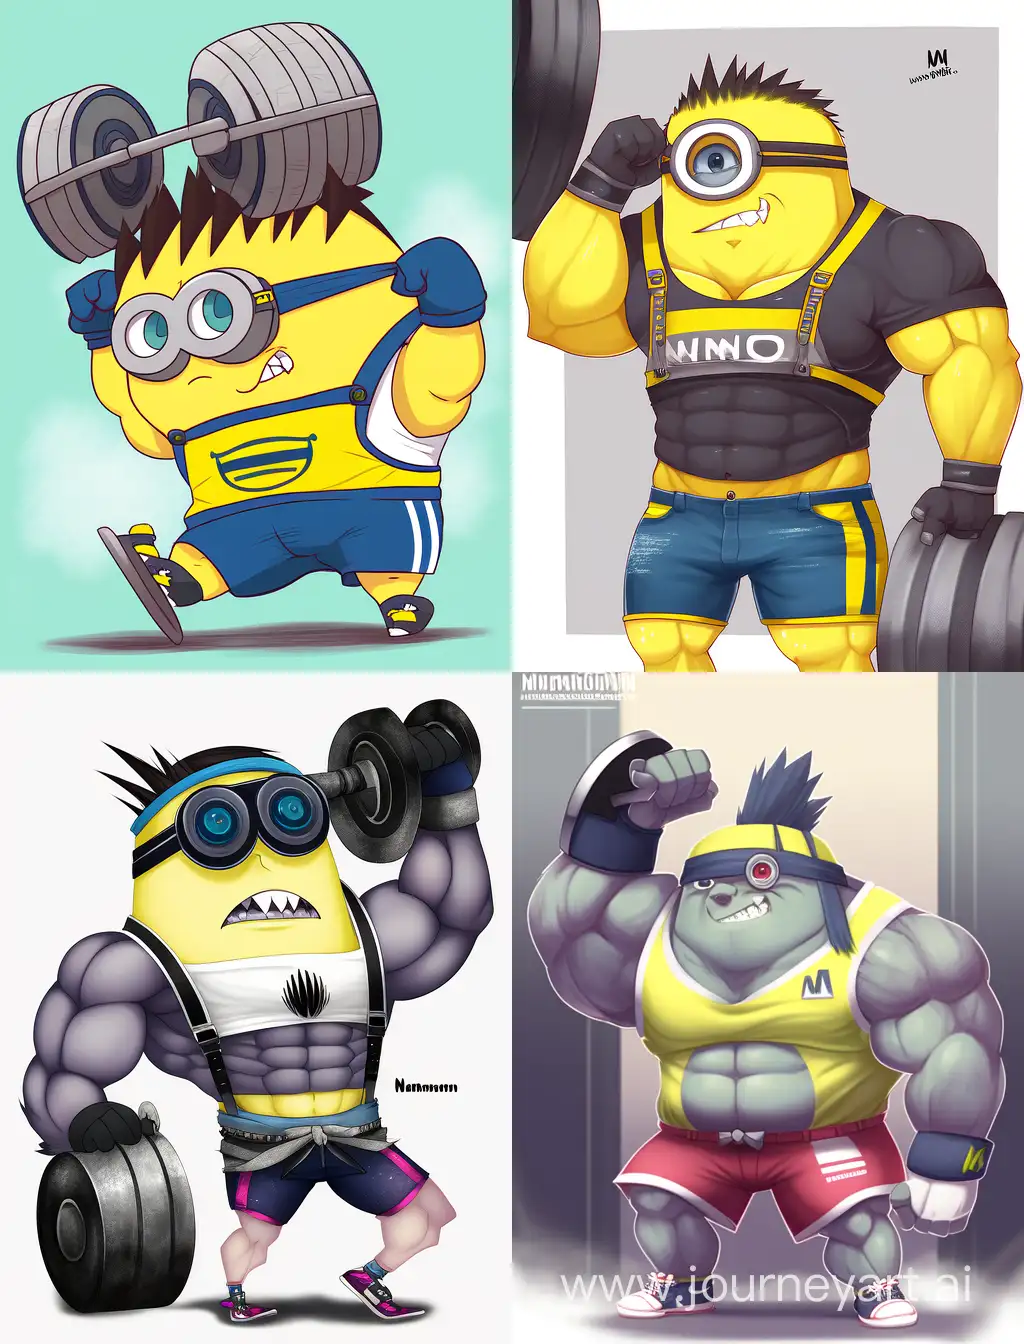 Minion is an athlete with big muscles